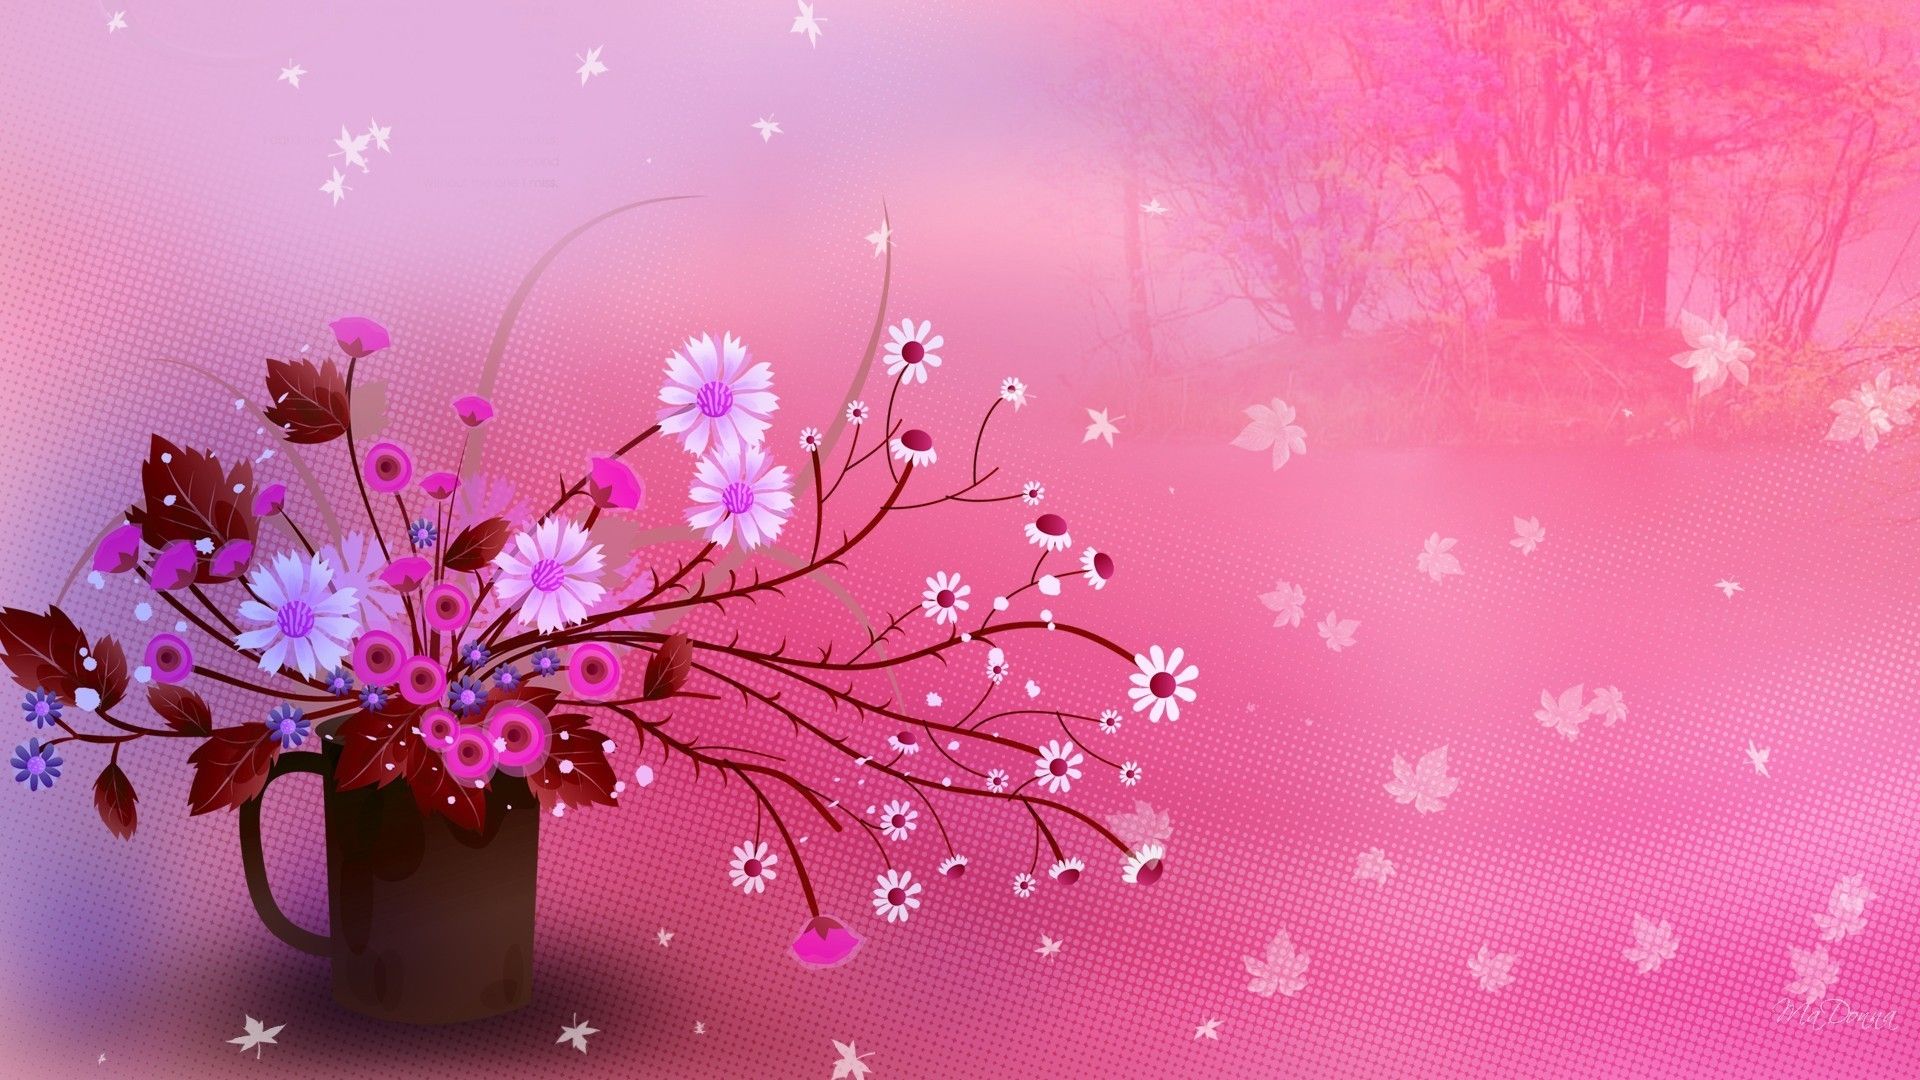 Cute Girly Flower Wallpapers on WallpaperDog